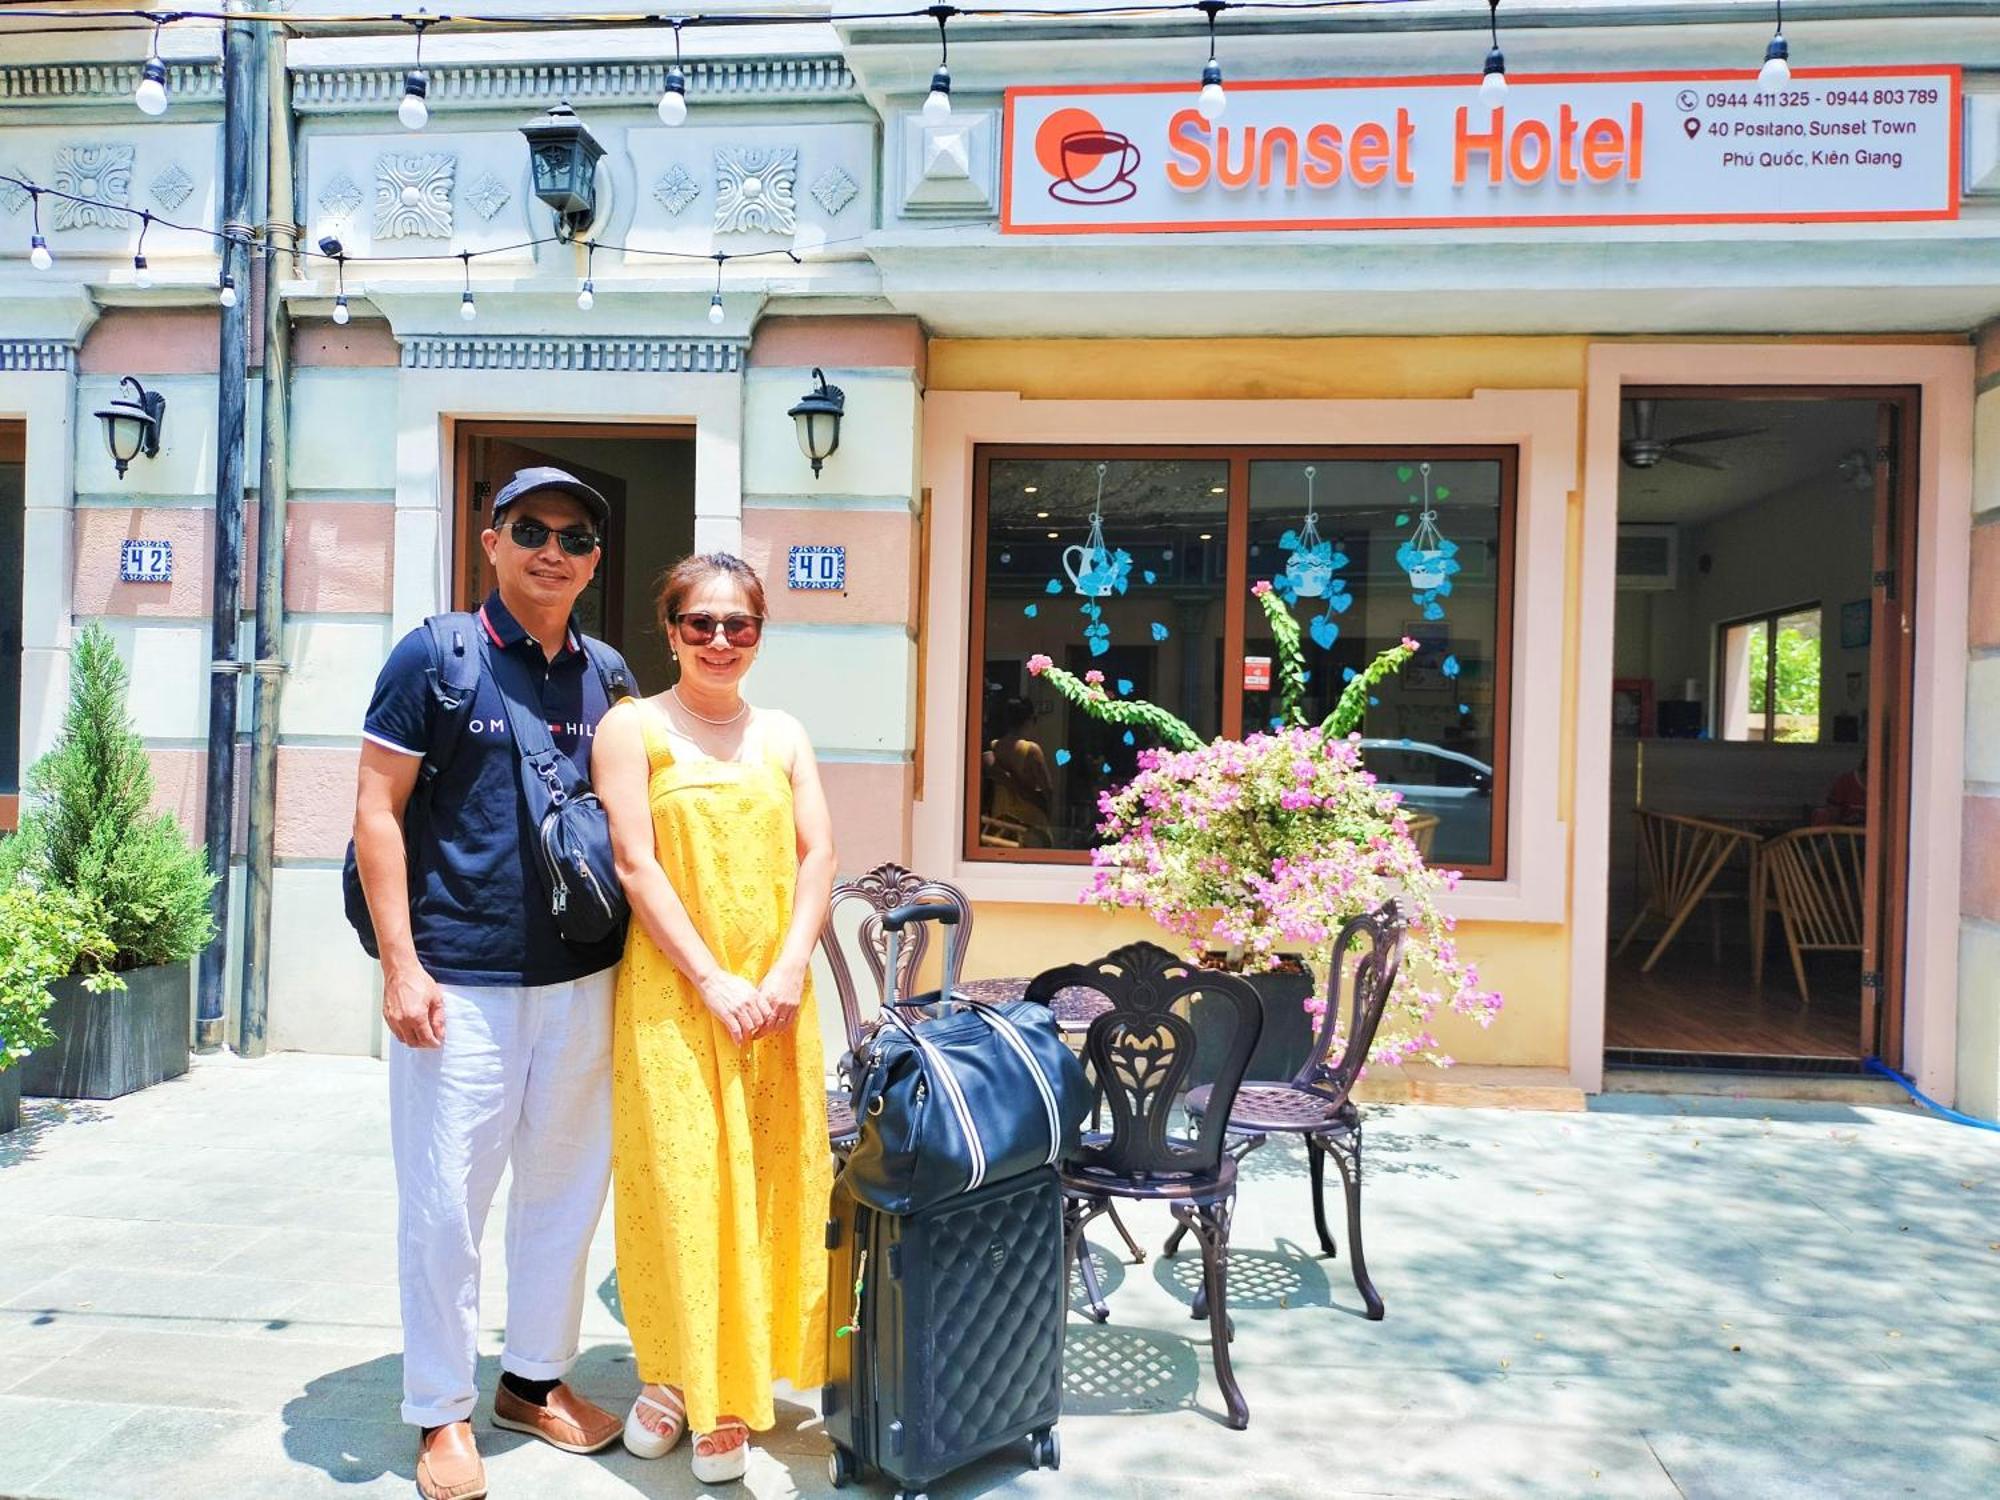 Sunset Hotel Phu Quoc - Welcome To A Mixing World Of Friends 外观 照片